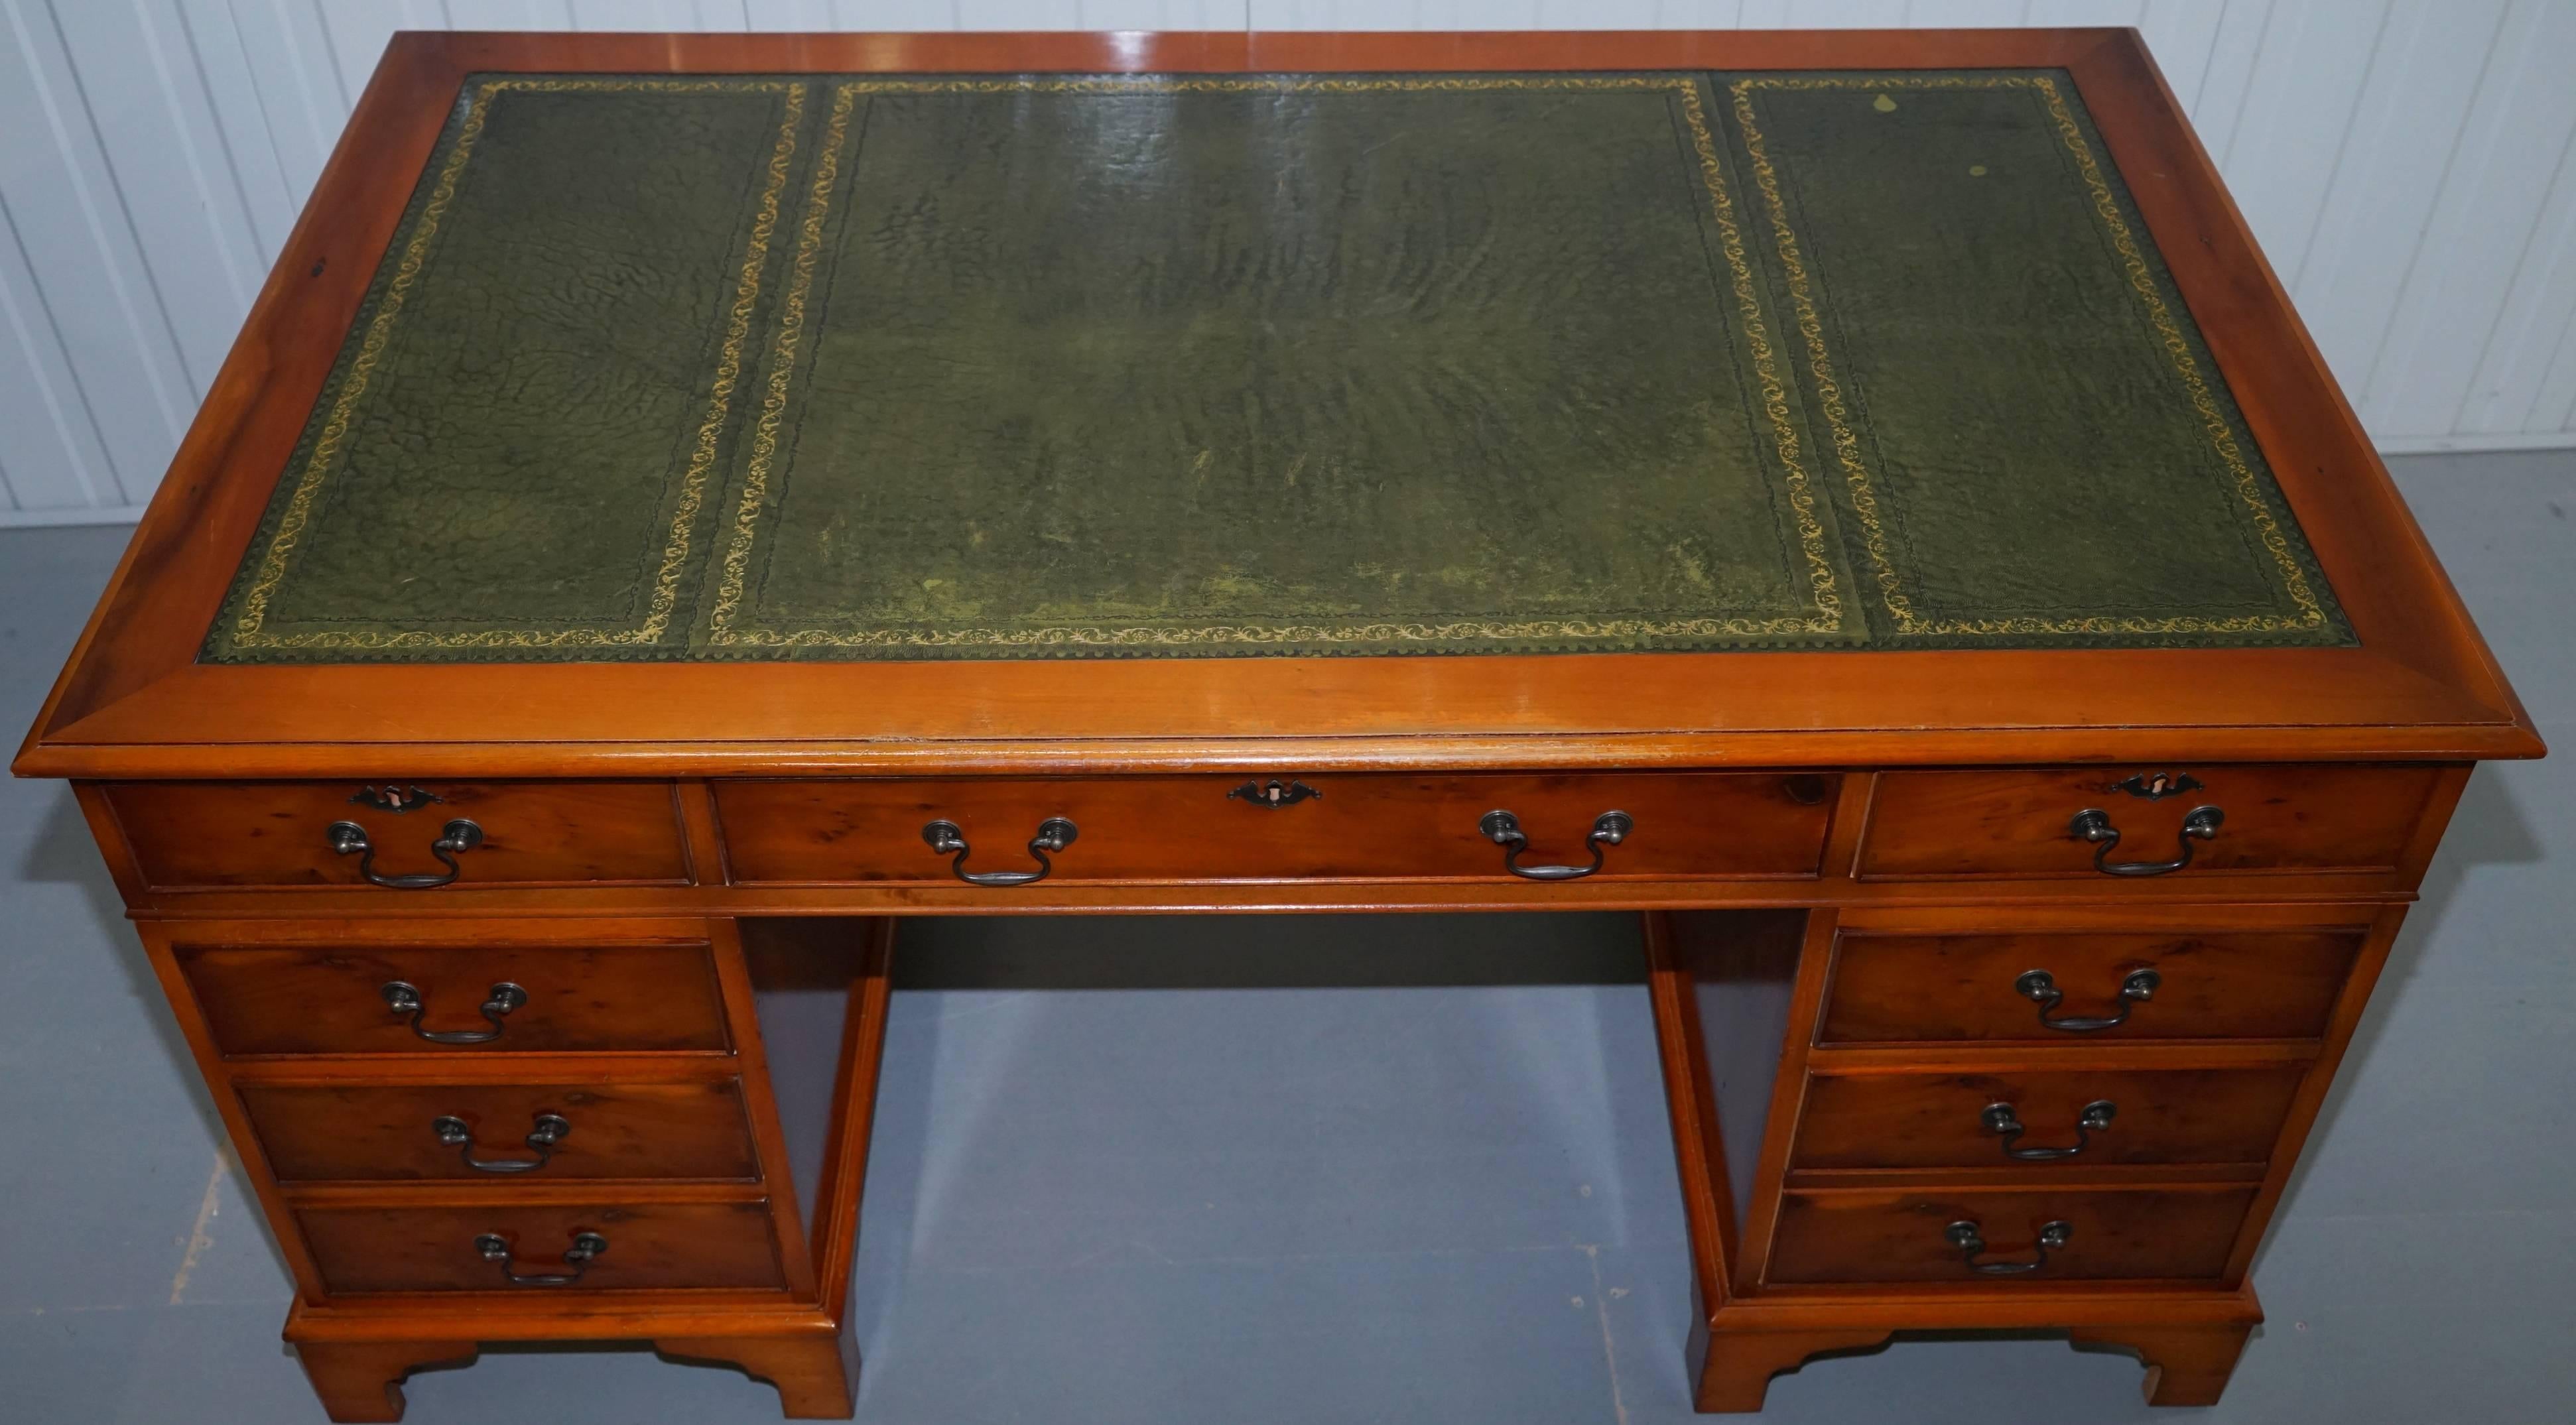 British Large Yew Twin Pedestal Partner Desk Green Leather Green Leather Writing Top